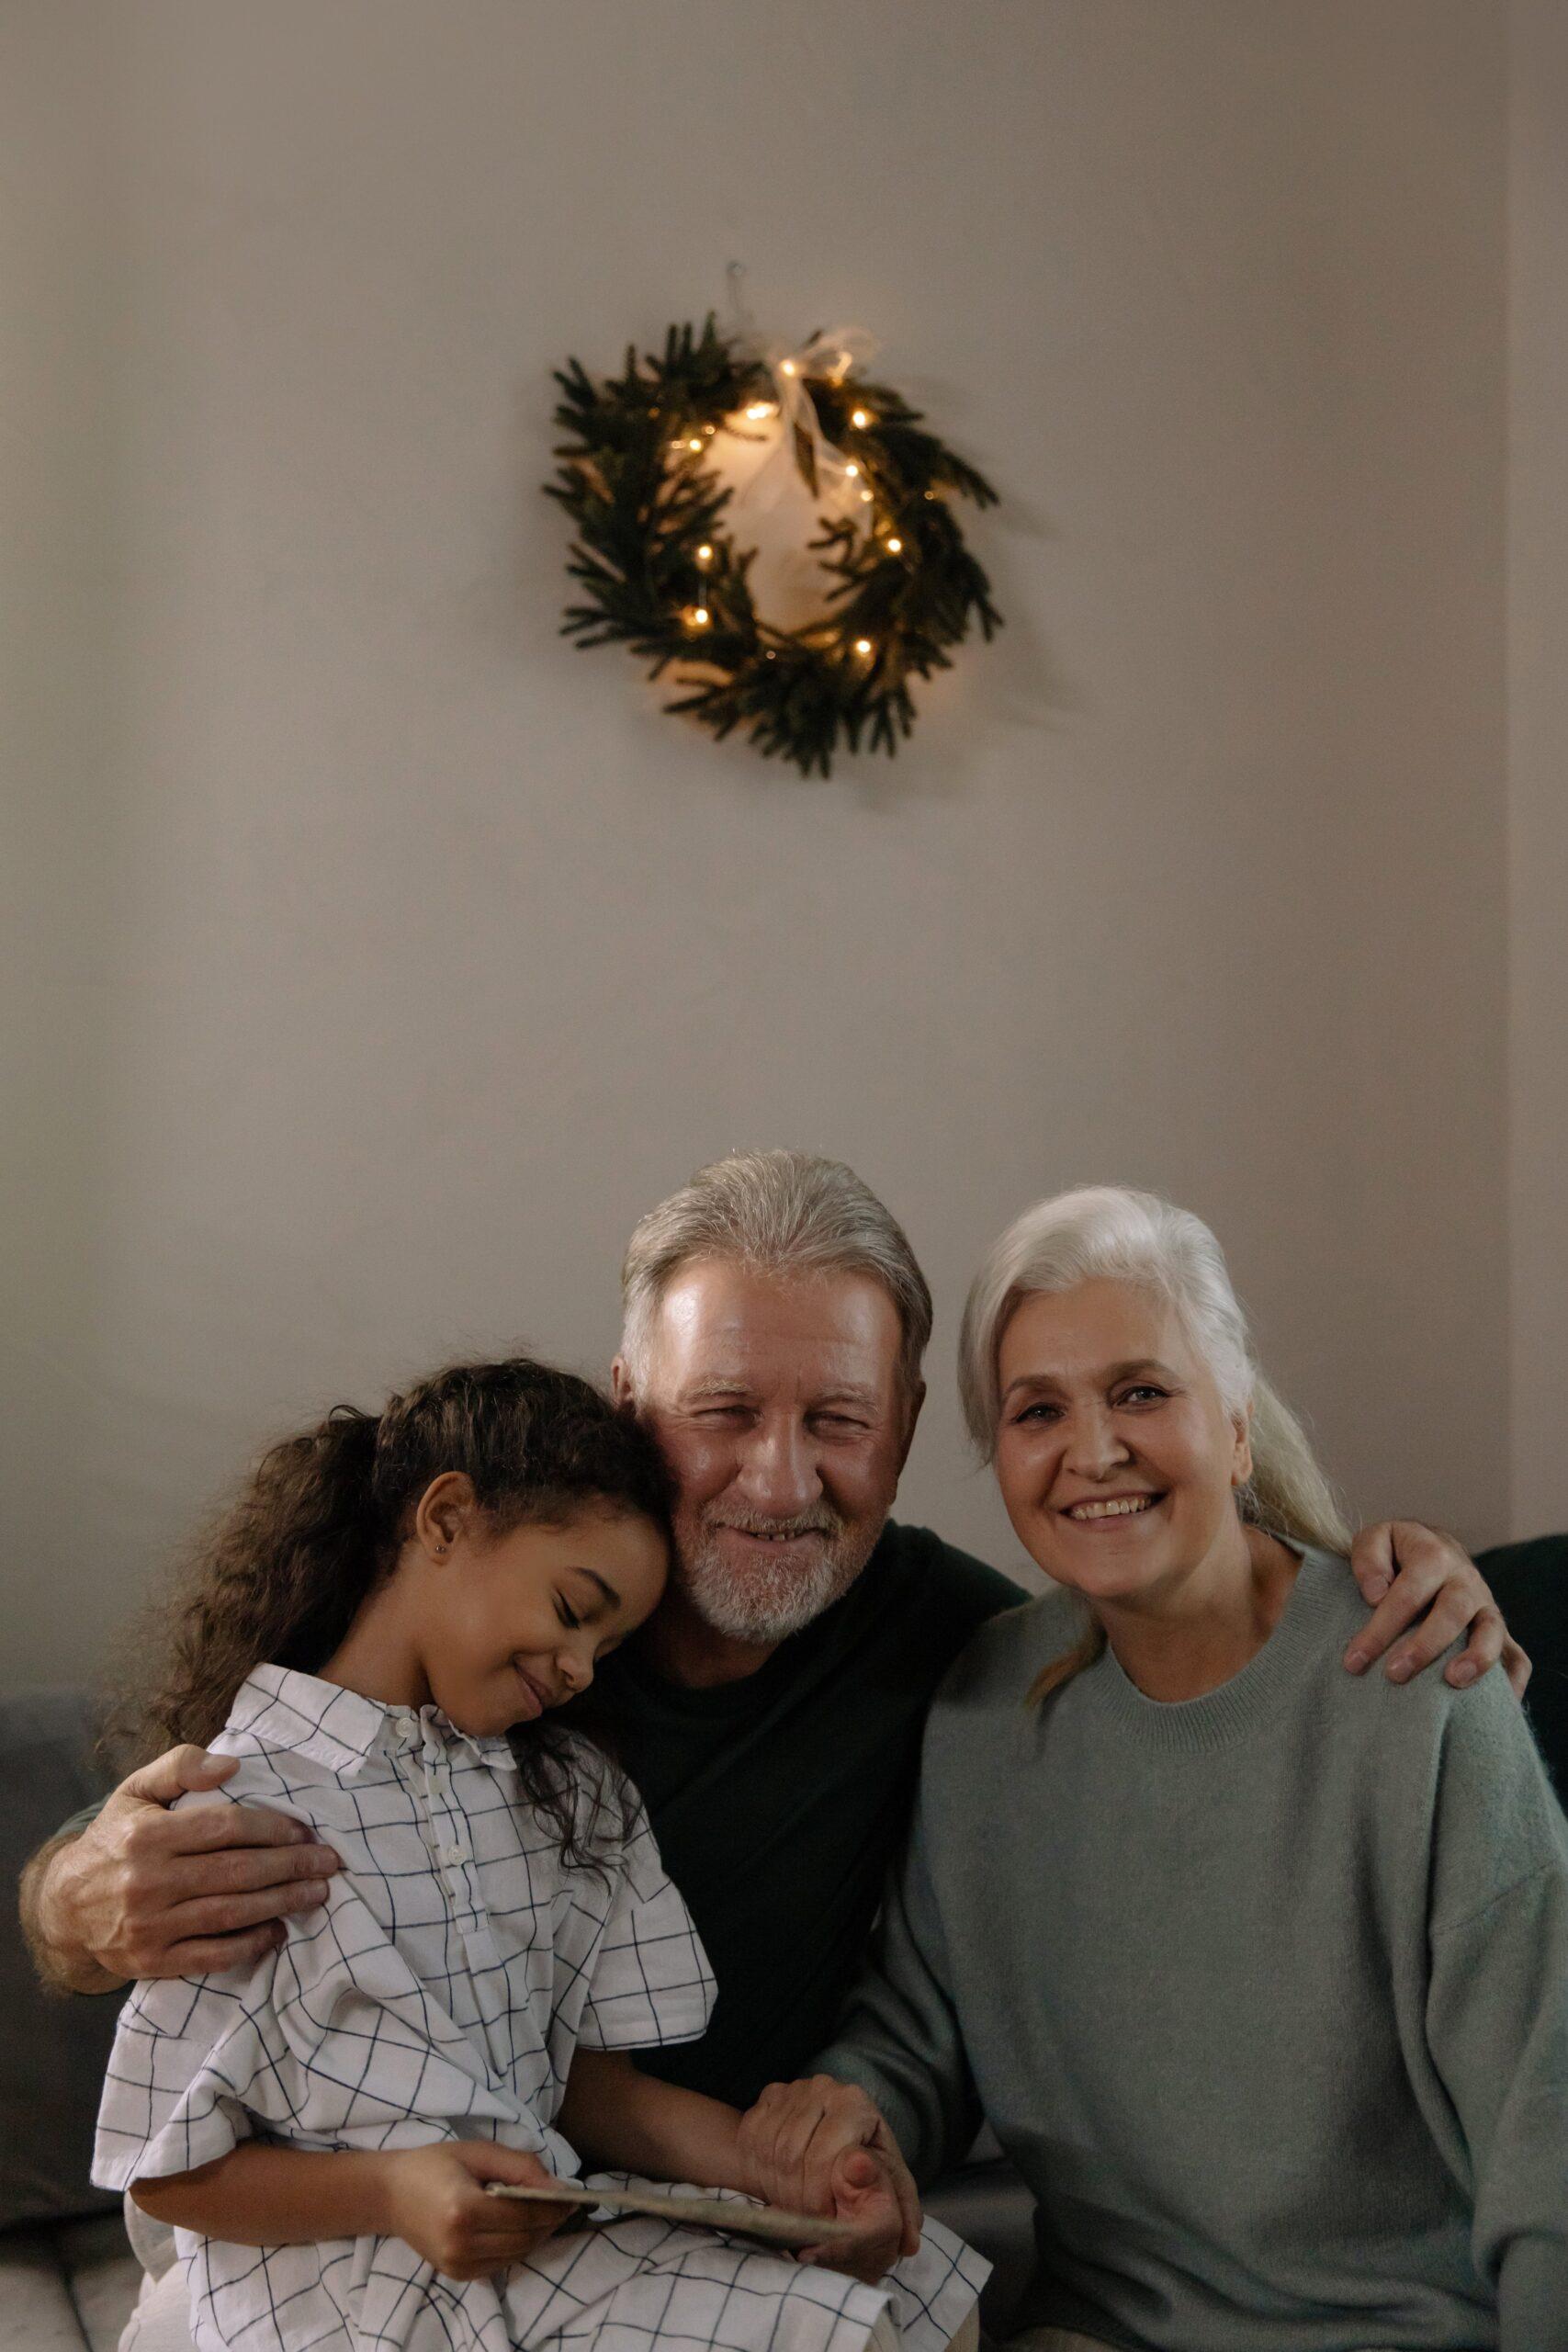 Merry Christmas Wishes For Grandparents